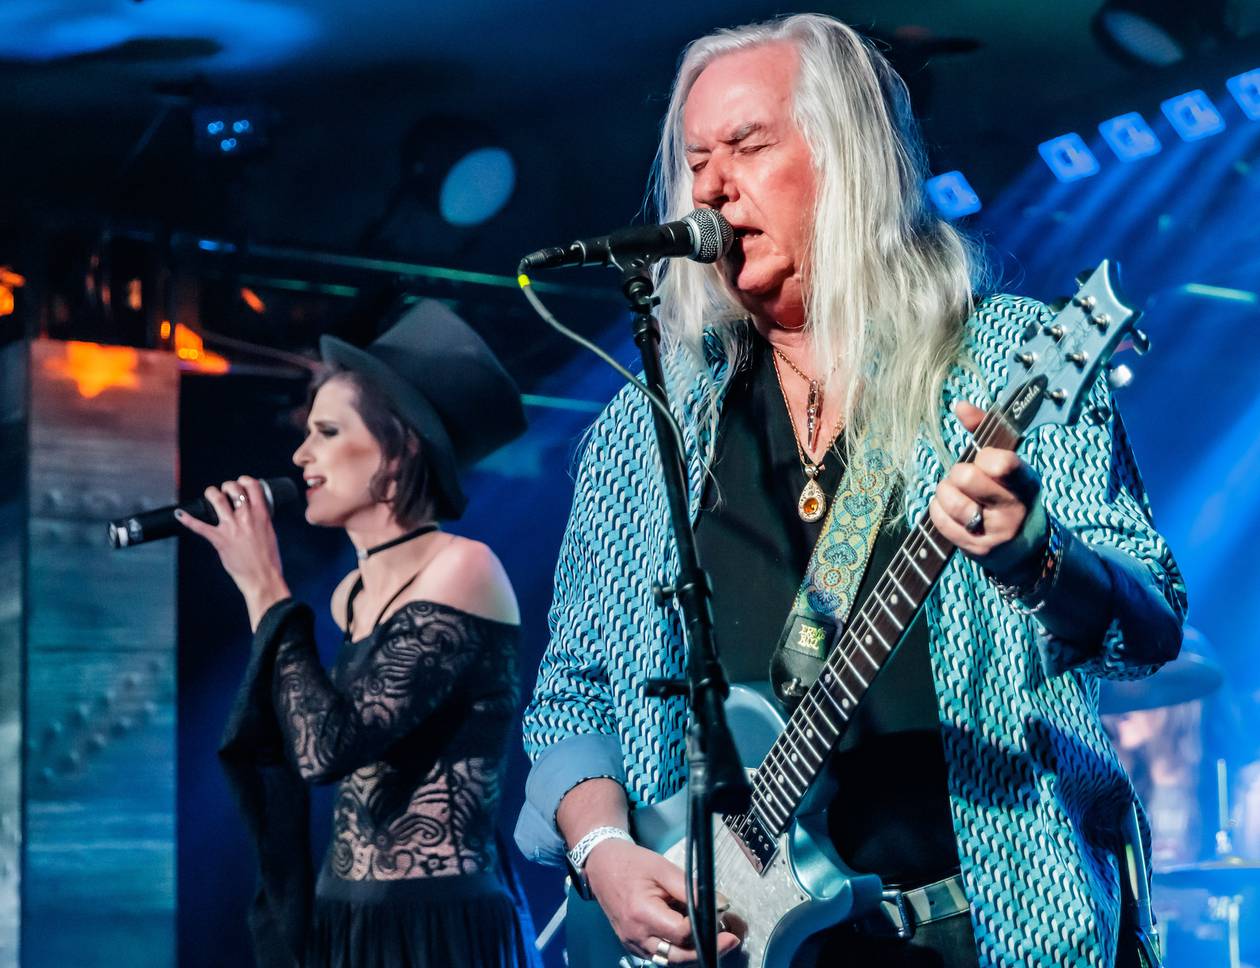 The show features classic rock hits from the ’60s, ’70s and ’80s performed by all-pro musicians who’ve been singing and playing with those legendary acts for years. It originated in Vegas in the ....